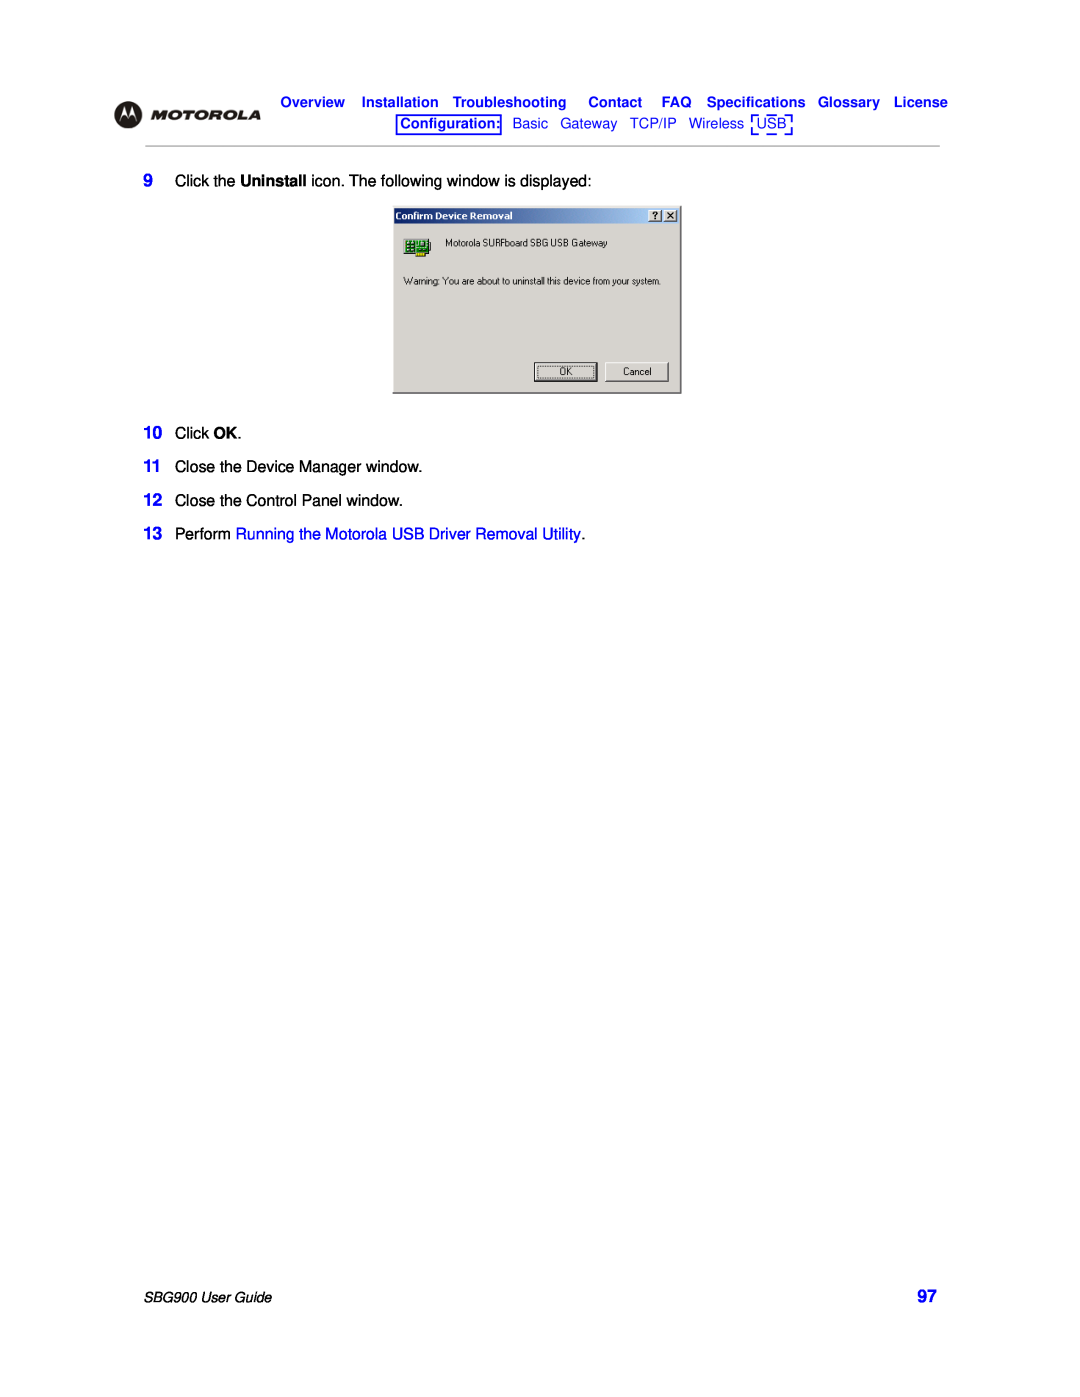 Motorola SBG900 manual Perform Running the Motorola USB Driver Removal Utility, Click OK 11 Close the Device Manager window 